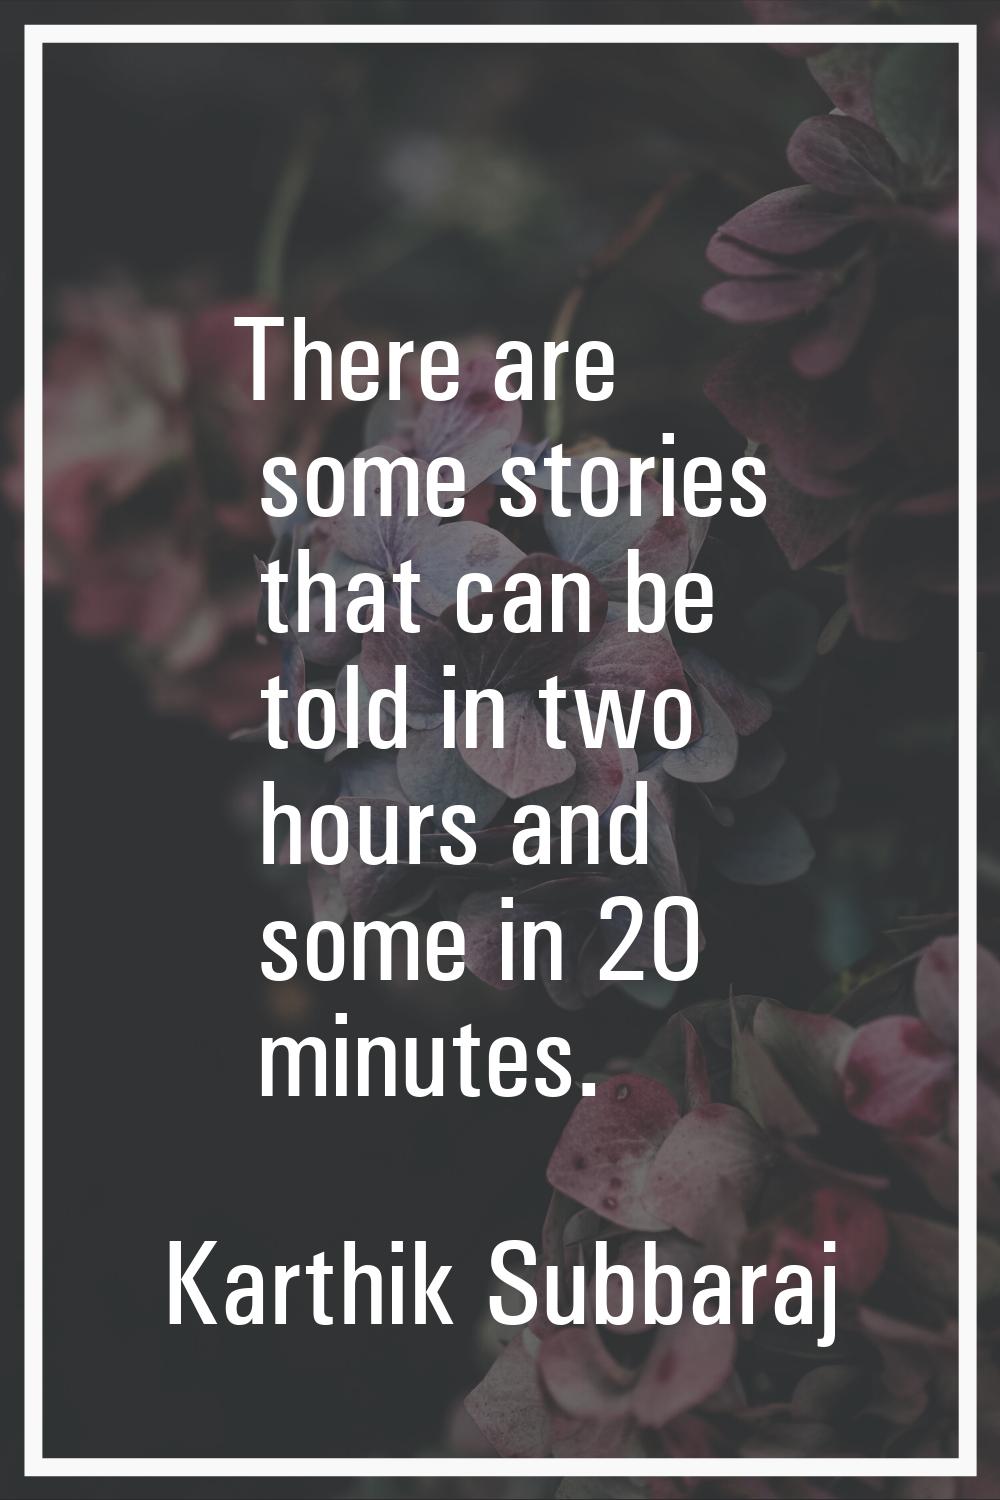 There are some stories that can be told in two hours and some in 20 minutes.